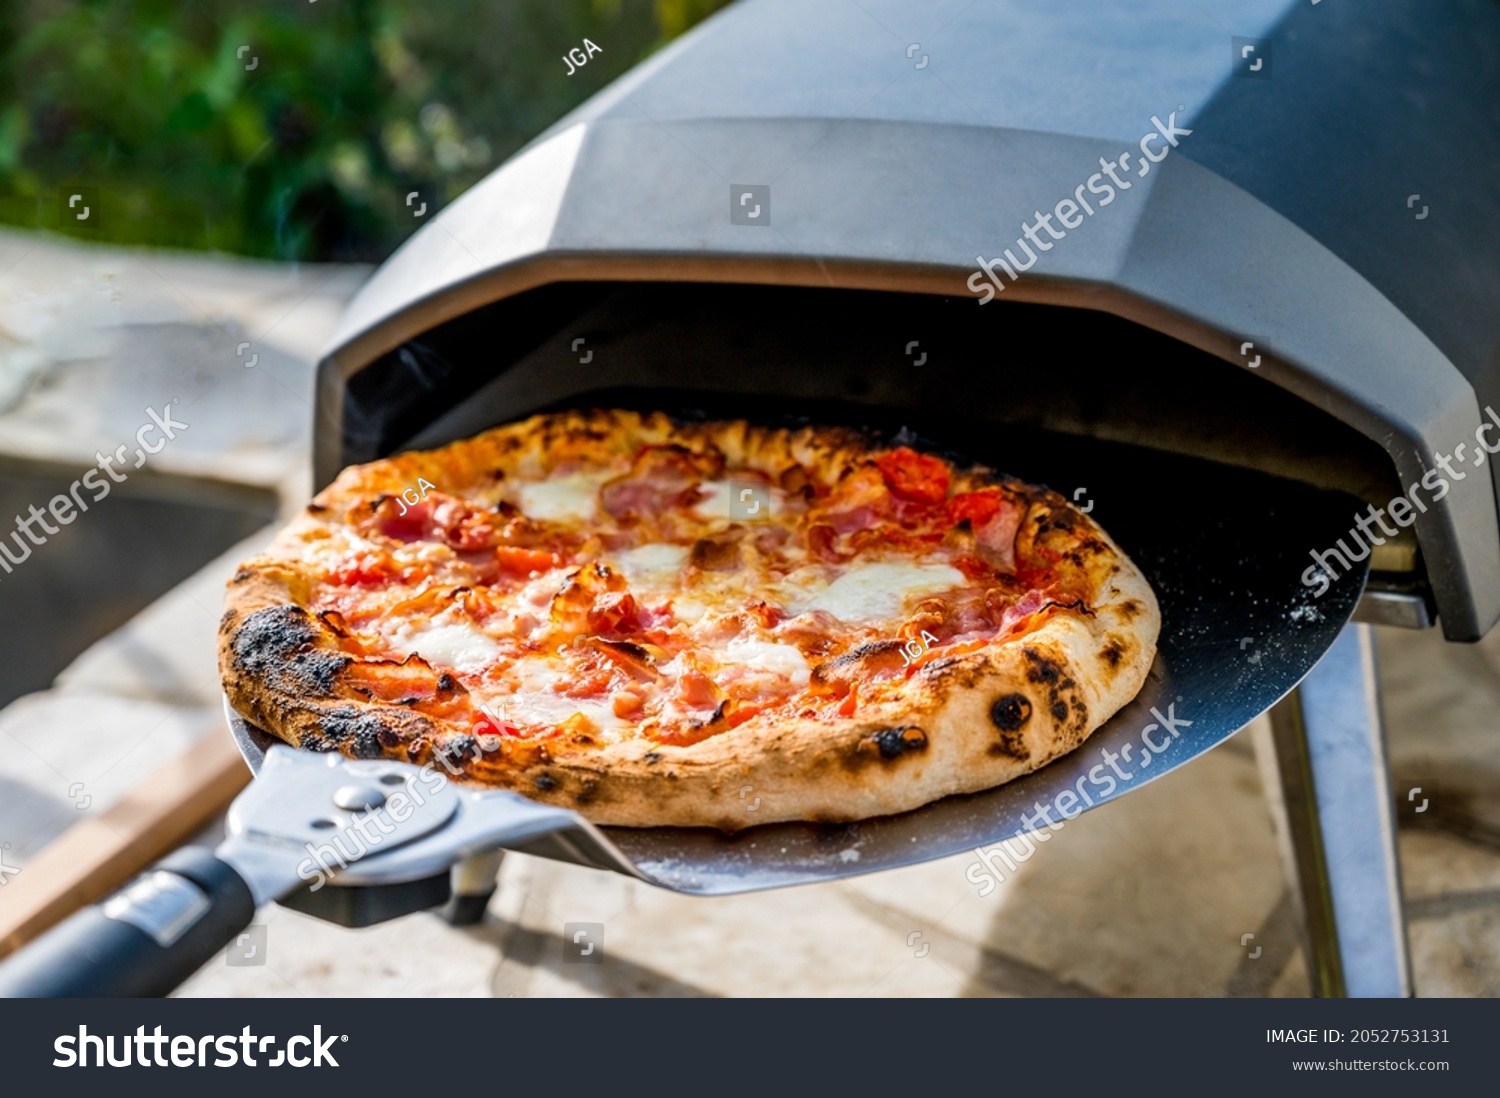 Making homemade pizza in portable high temperature gas  oven. Delicious pizza is baking in gas oven furnace for home made Neapolitan pizza. Special gas fueled pizza oven for picnic or party. #2052753131